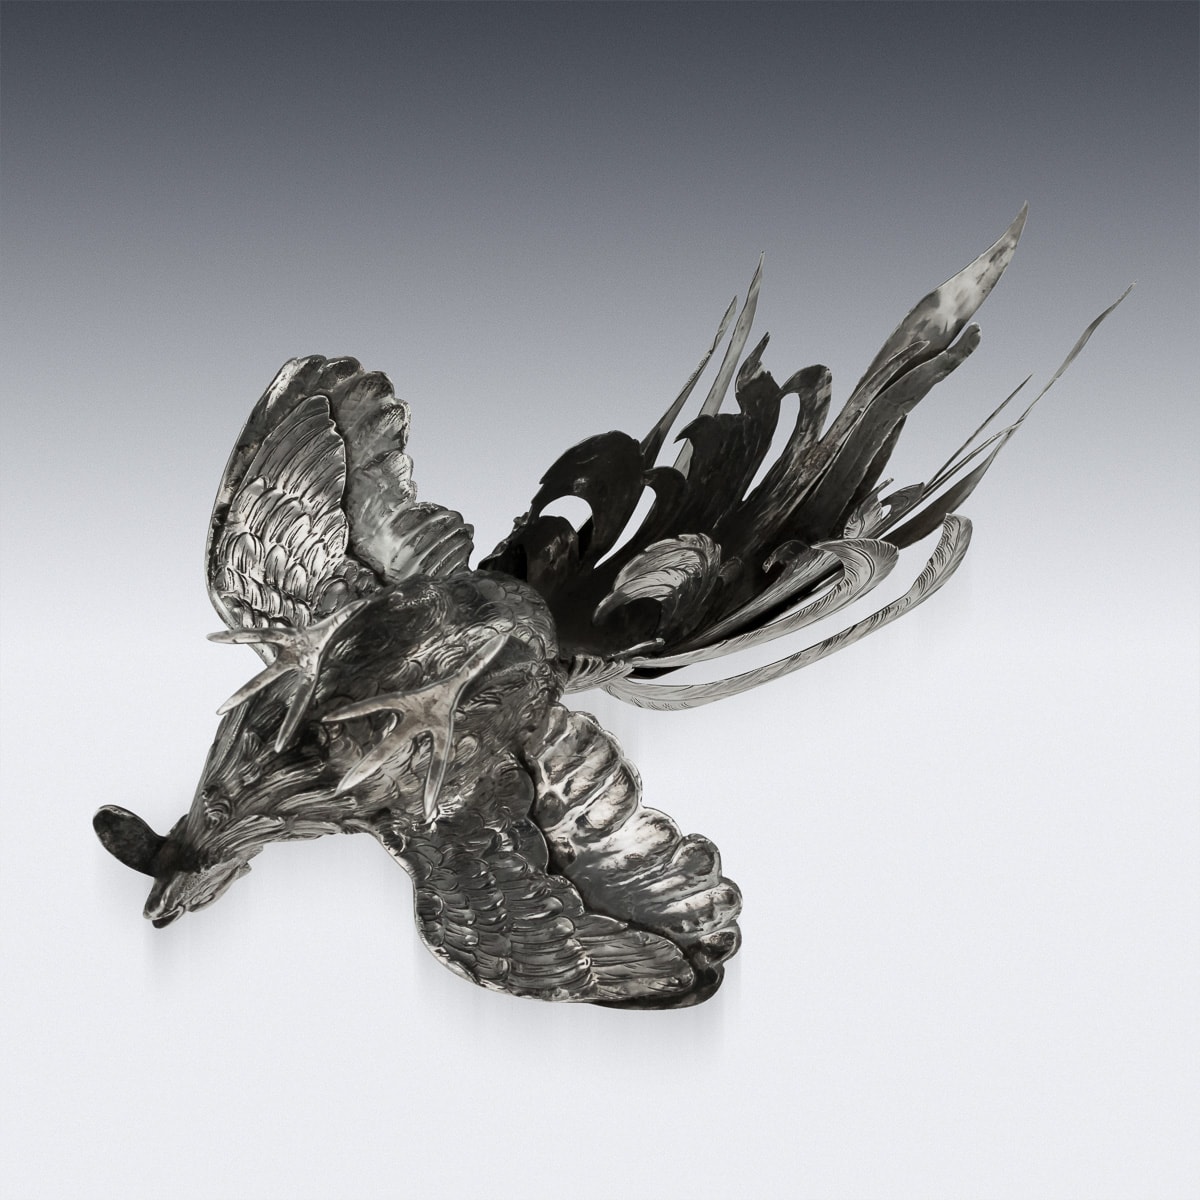 A PAIR OF GERMAN SILVER TABLE ORNAMENTS MODELLED AS FIGHTING COCKERELS - Image 27 of 41